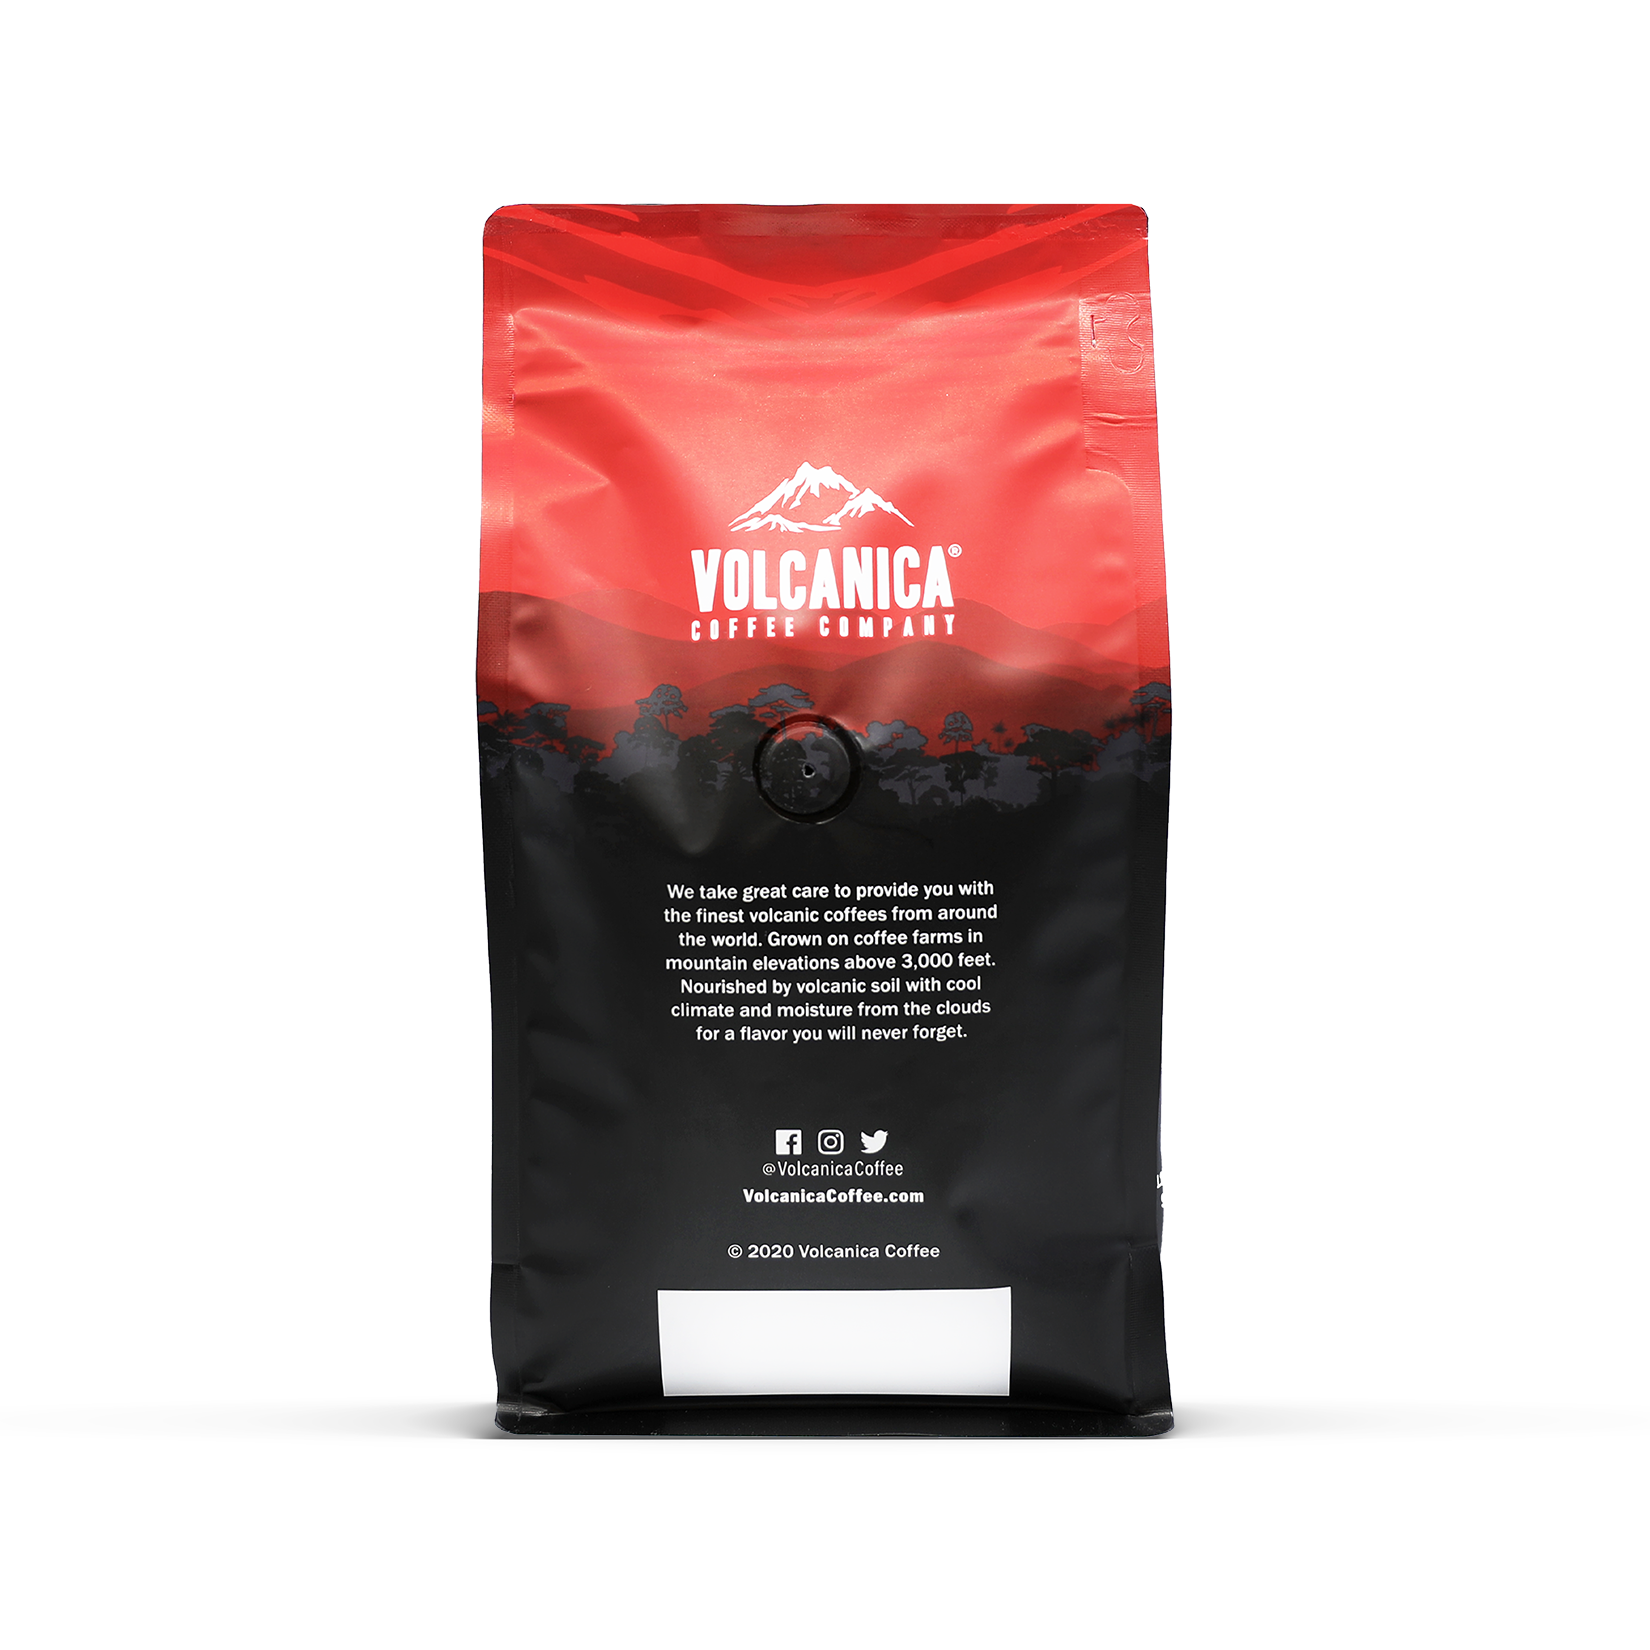 Rudolph Peppermint Stick Decaf Flavored Coffee - Volcanica Coffee